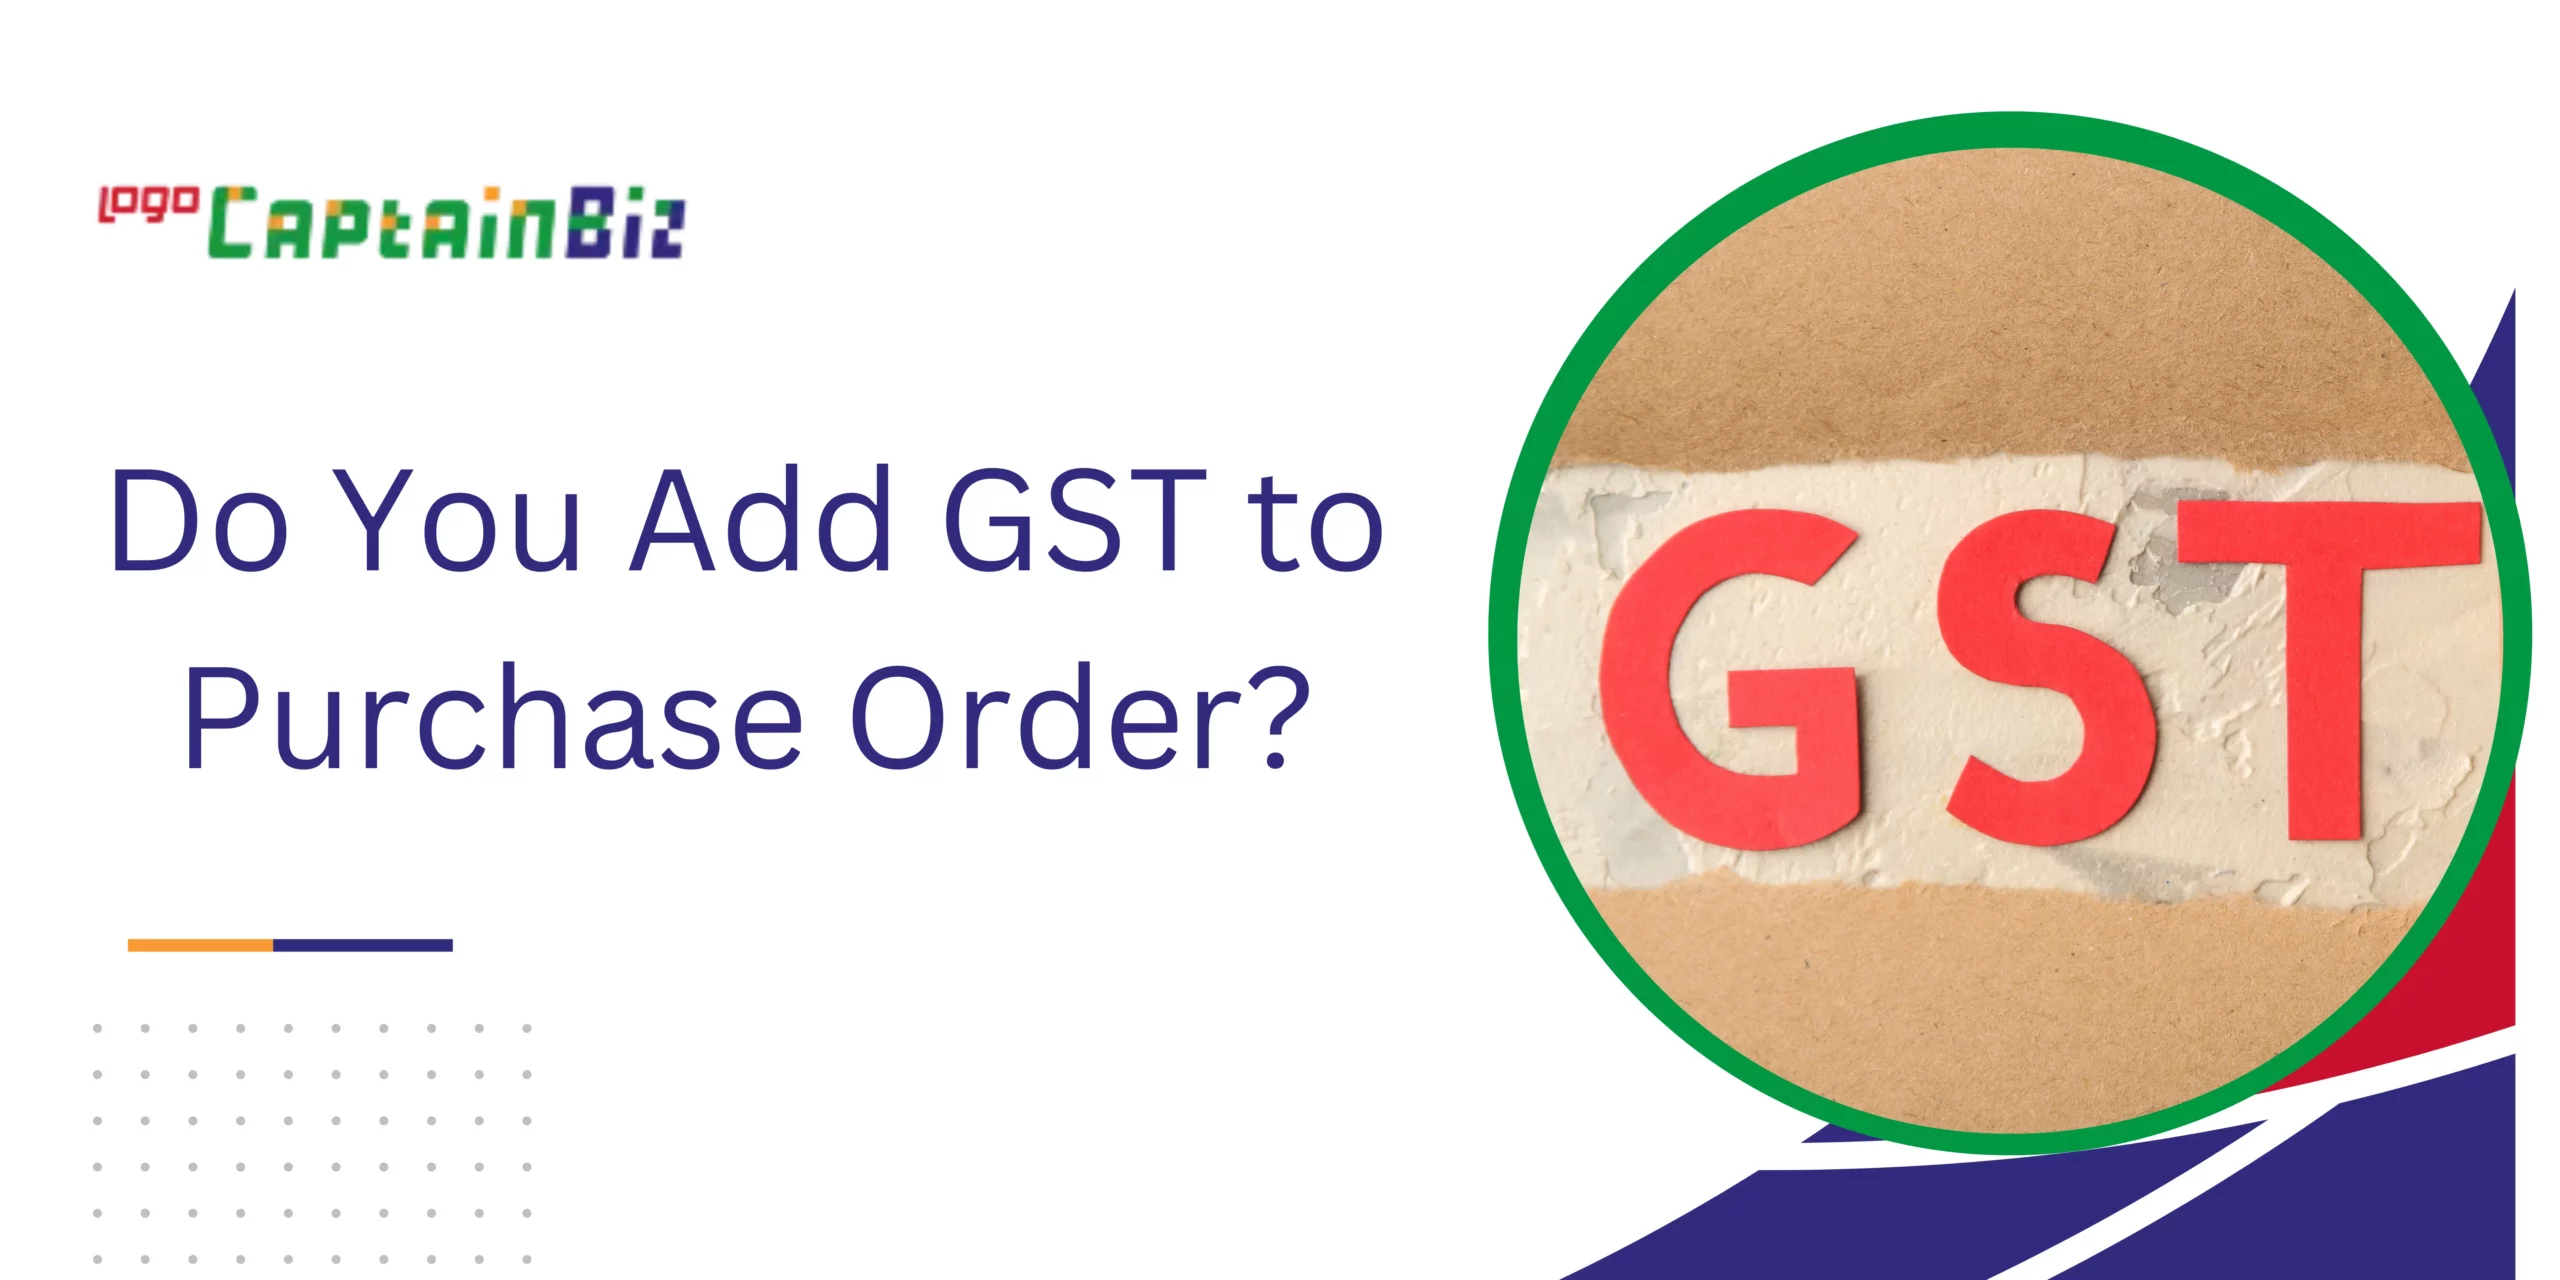 CaptainBiz: Do You Add GST to a Purchase Order